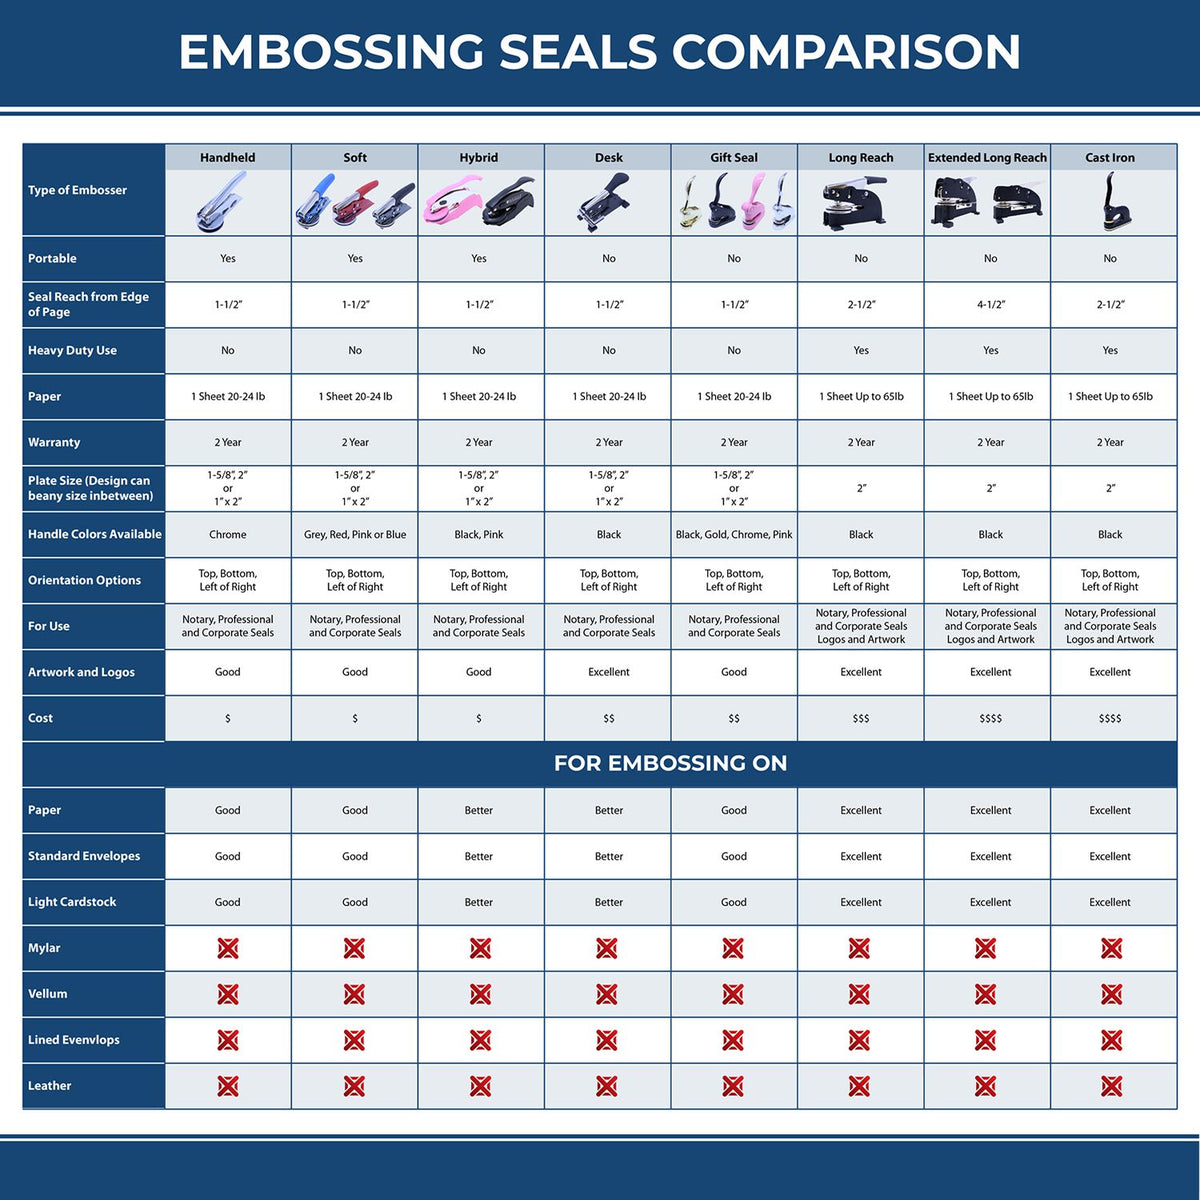 A comparison chart for the different types of mount models available for the Hybrid Minnesota Landscape Architect Seal